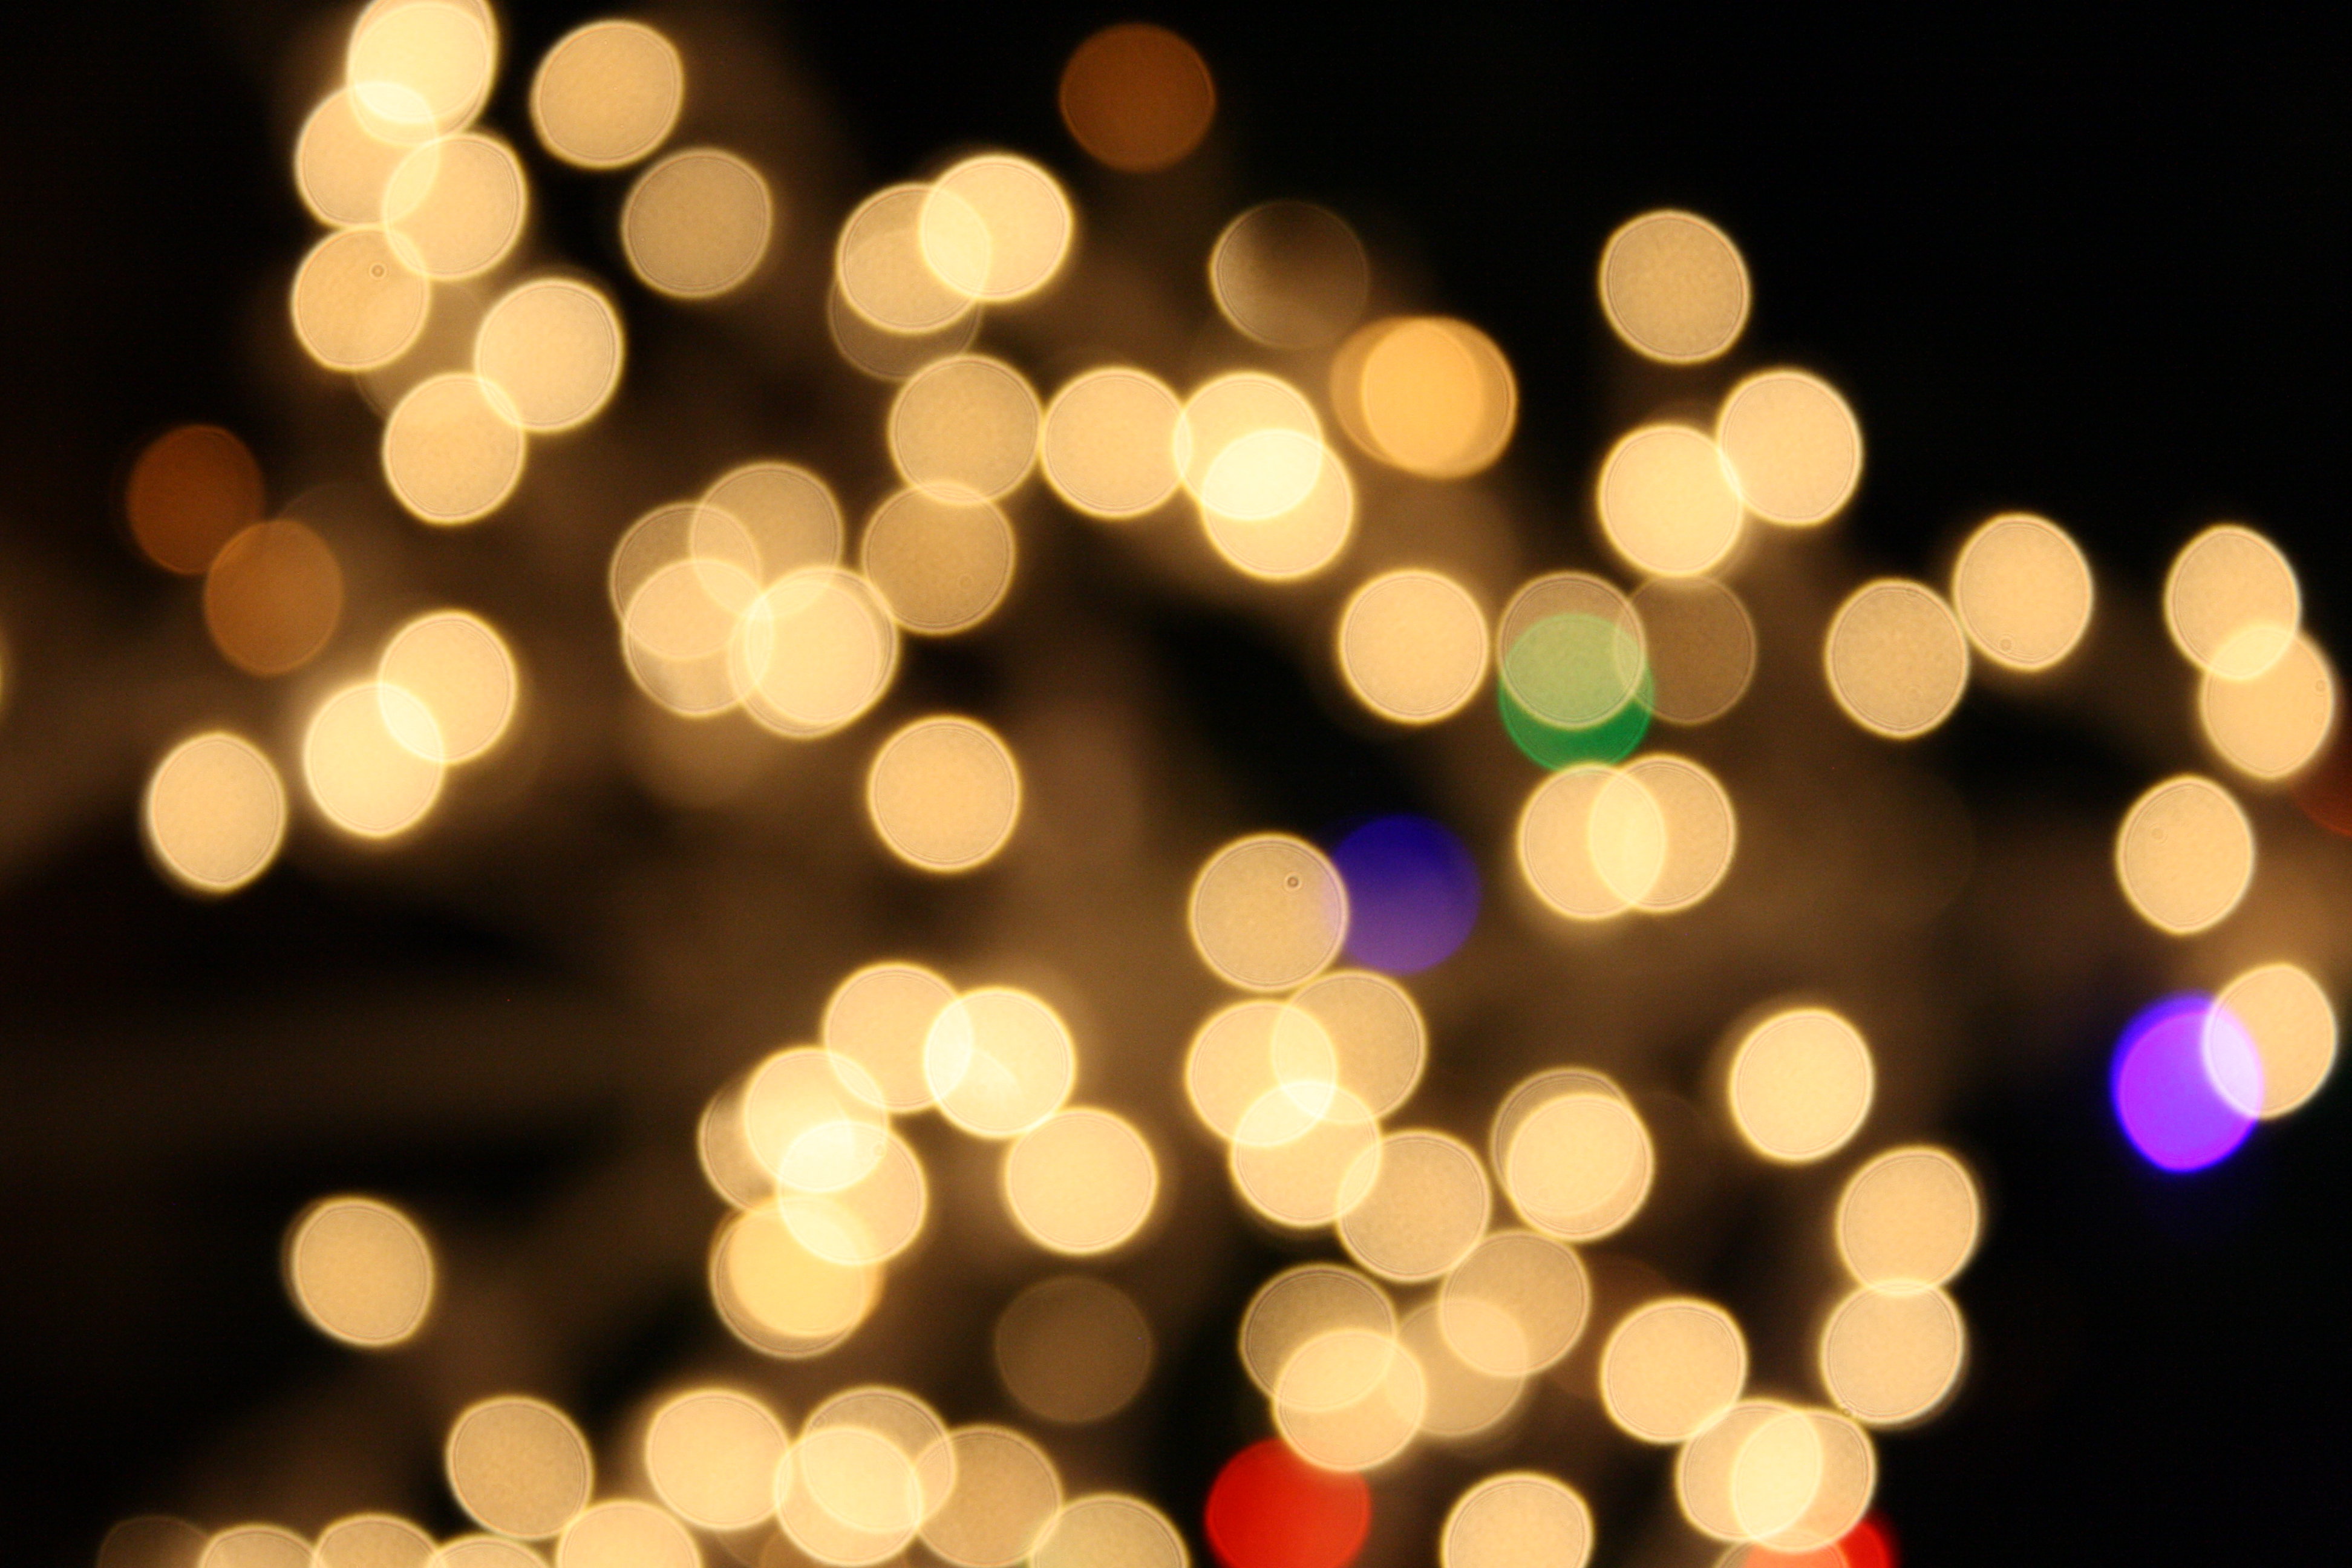 Blurred Christmas Lights White Picture | Free Photograph | Photos ...